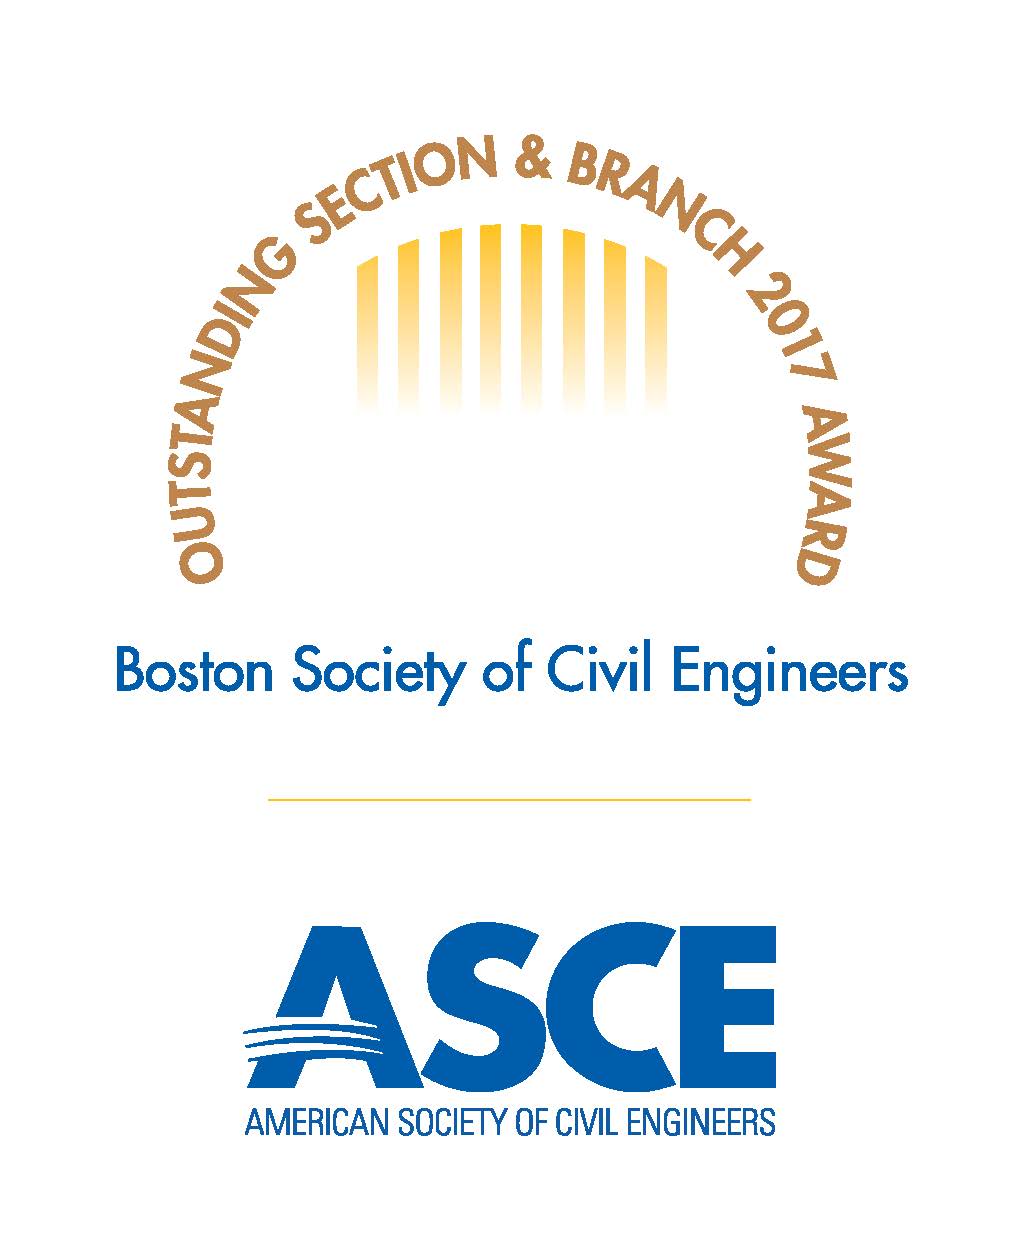 ASCE Logo - BSCES - Boston Society of Civil Engineers Section